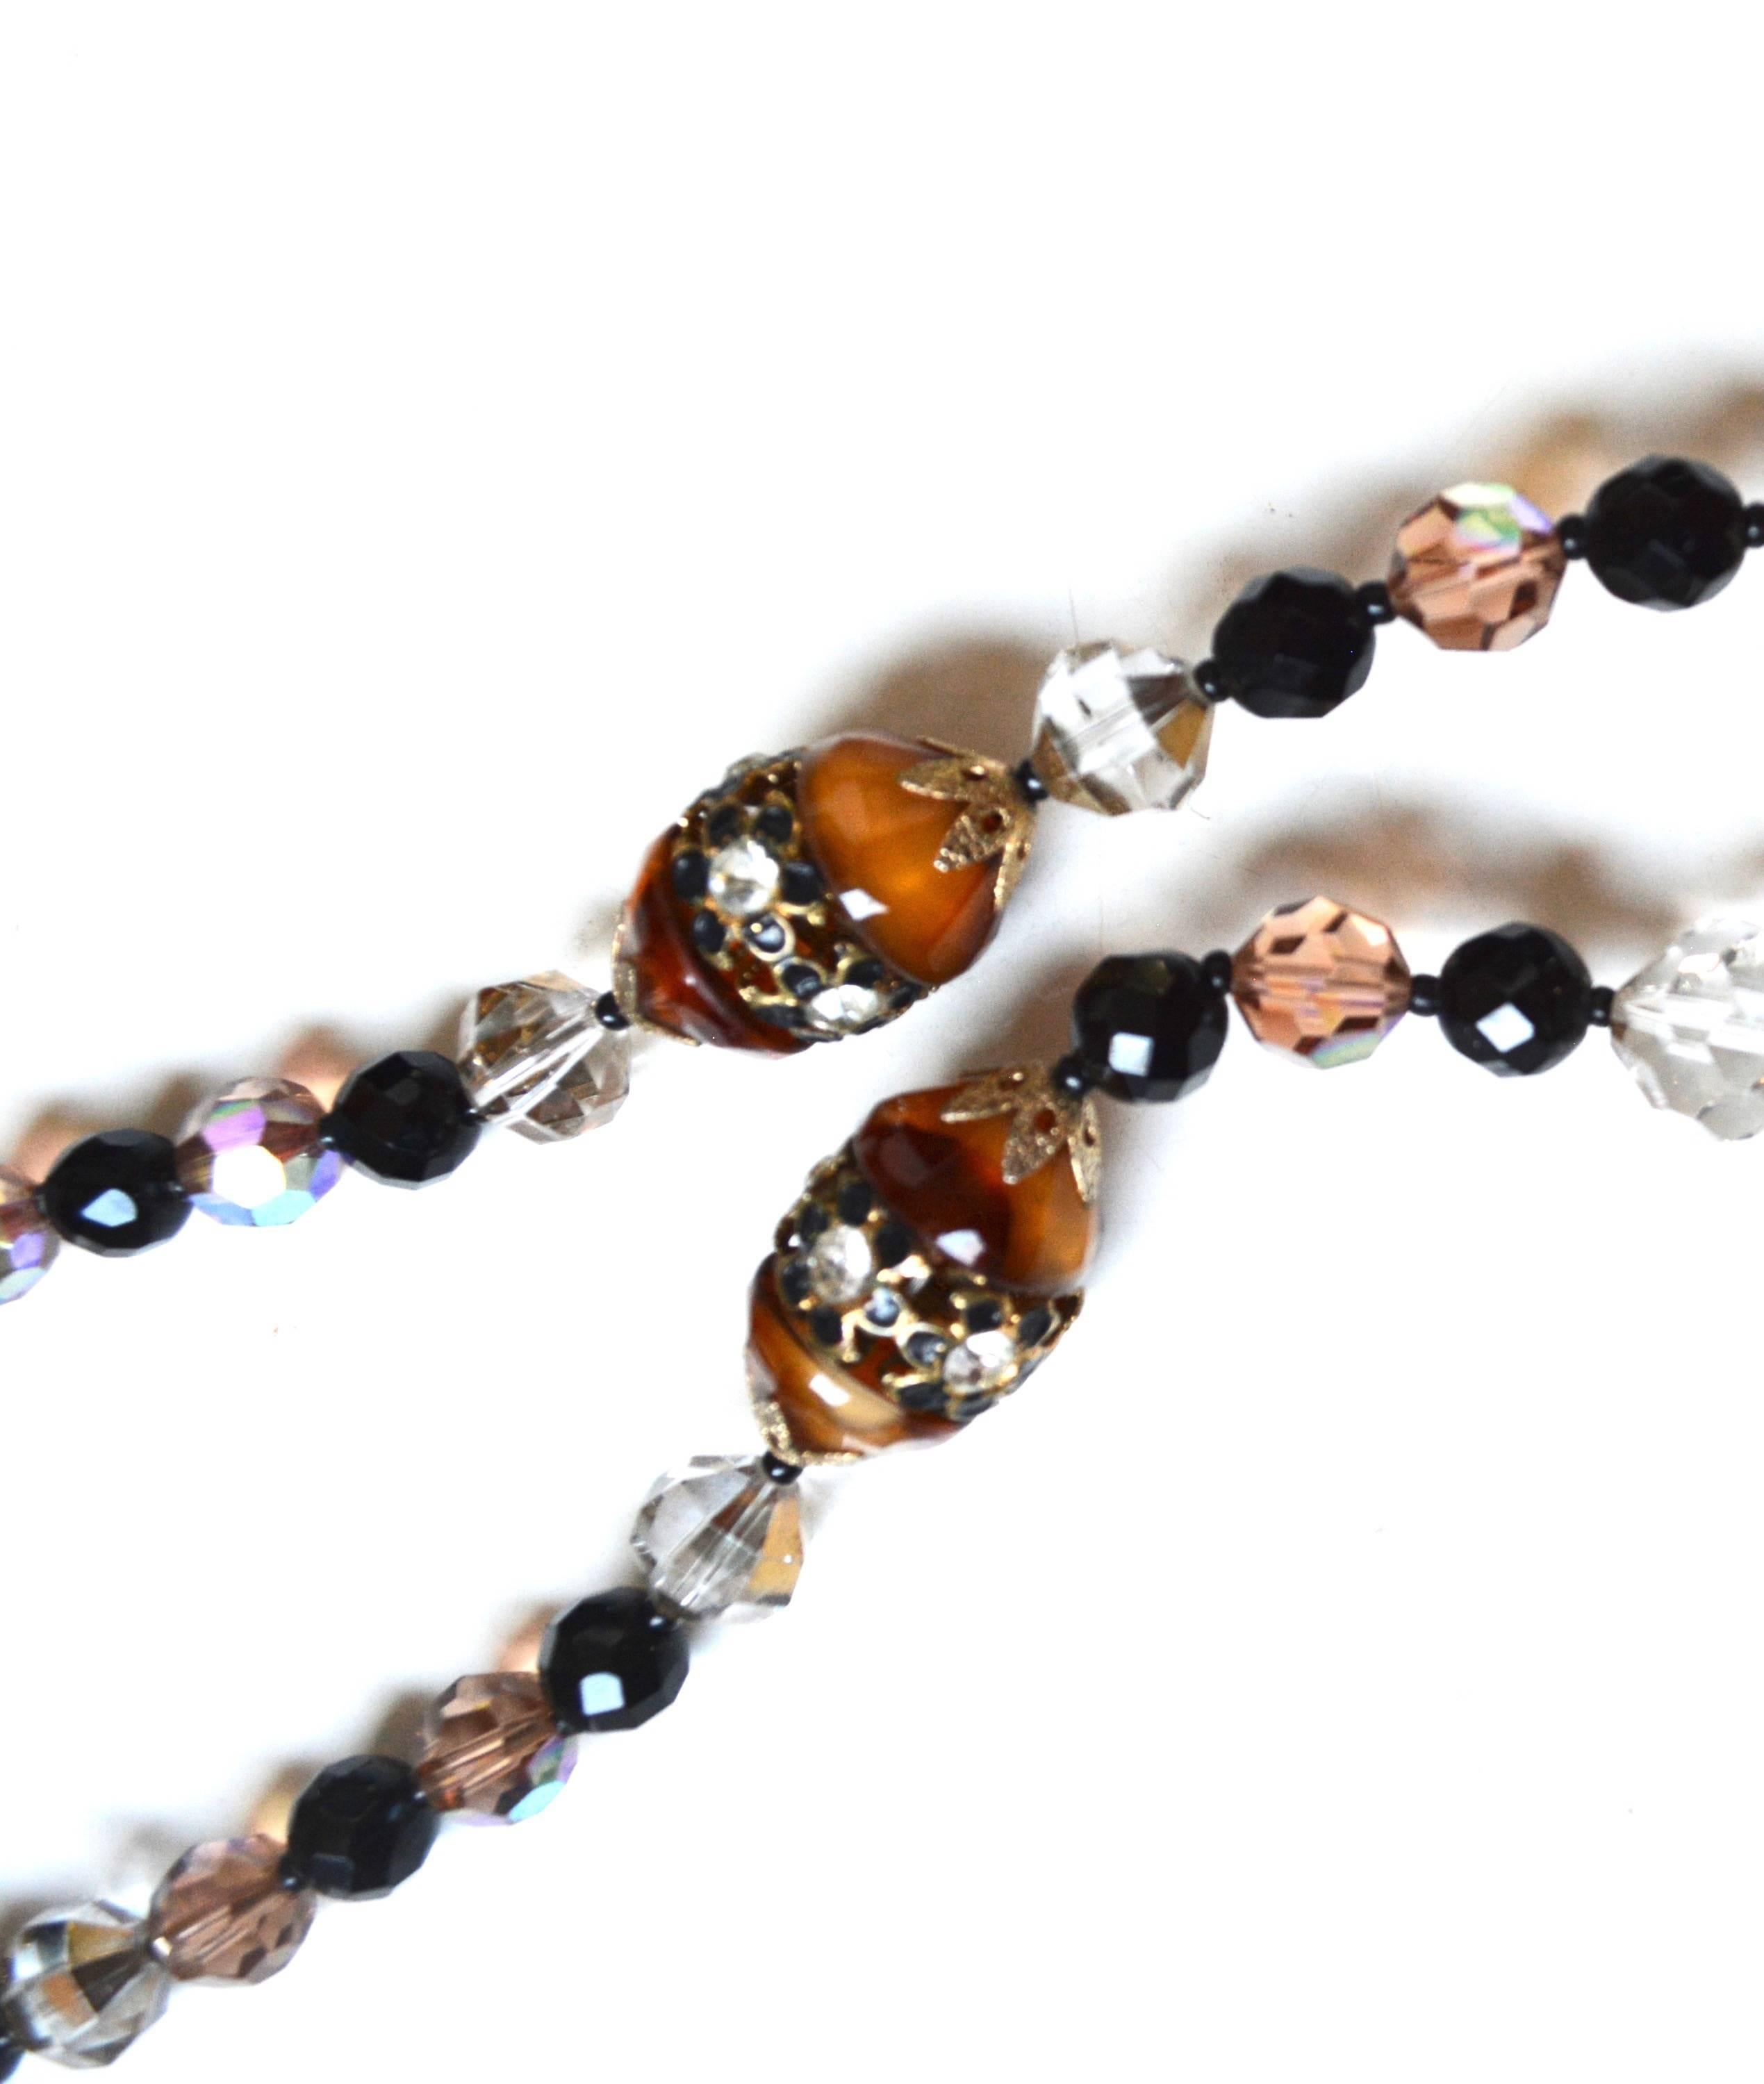 1960s signed Vendome glass bead necklace featuring various earth tones and black glass beads. The larger sort of amber glass beads are a nice color. Good condition with some wear to the clasp finish, which is now more of a matte finish.  A few tiny